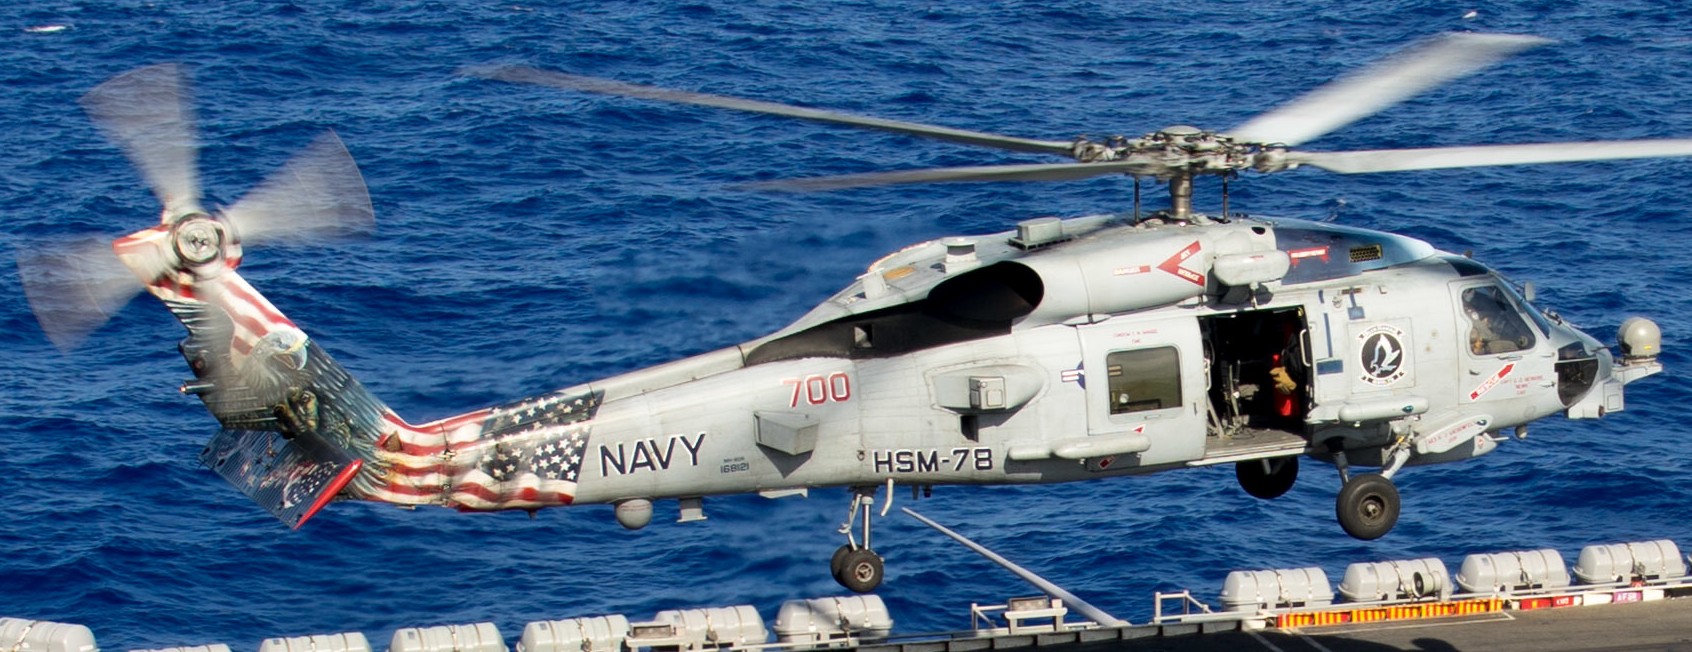 hsm-78 blue hawks helicopter maritime strike squadron mh-60r seahawk us navy 2013 31